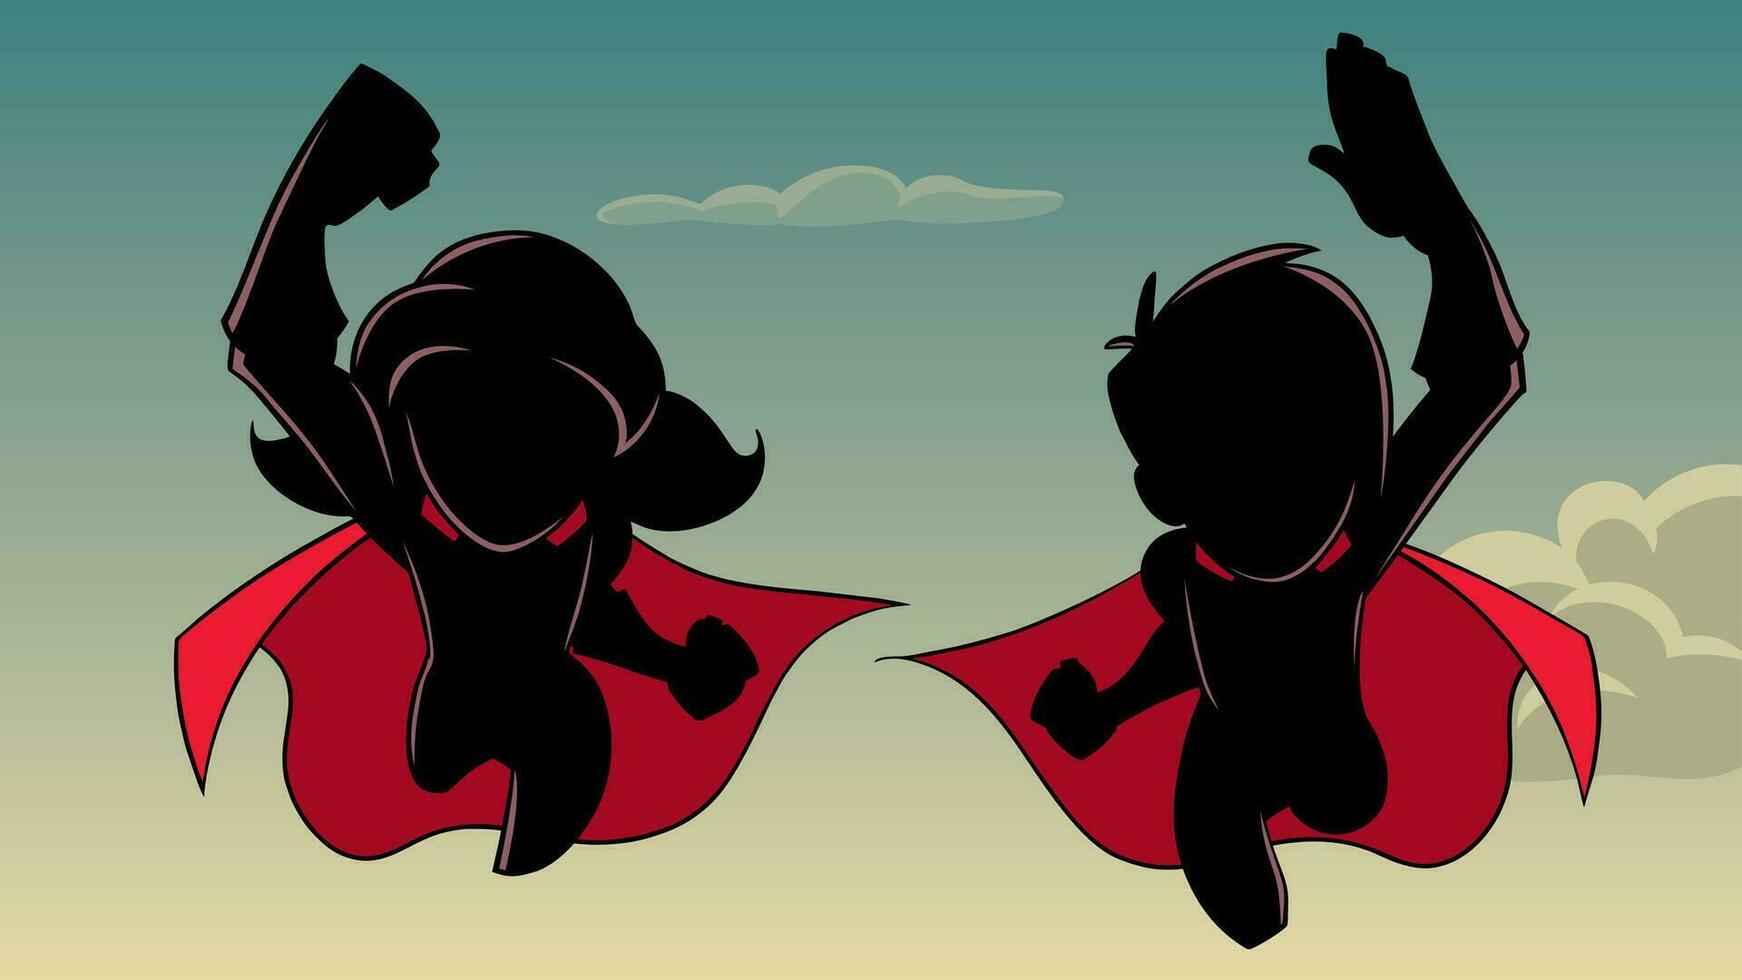 Boy and Girl Flying Silhouette vector